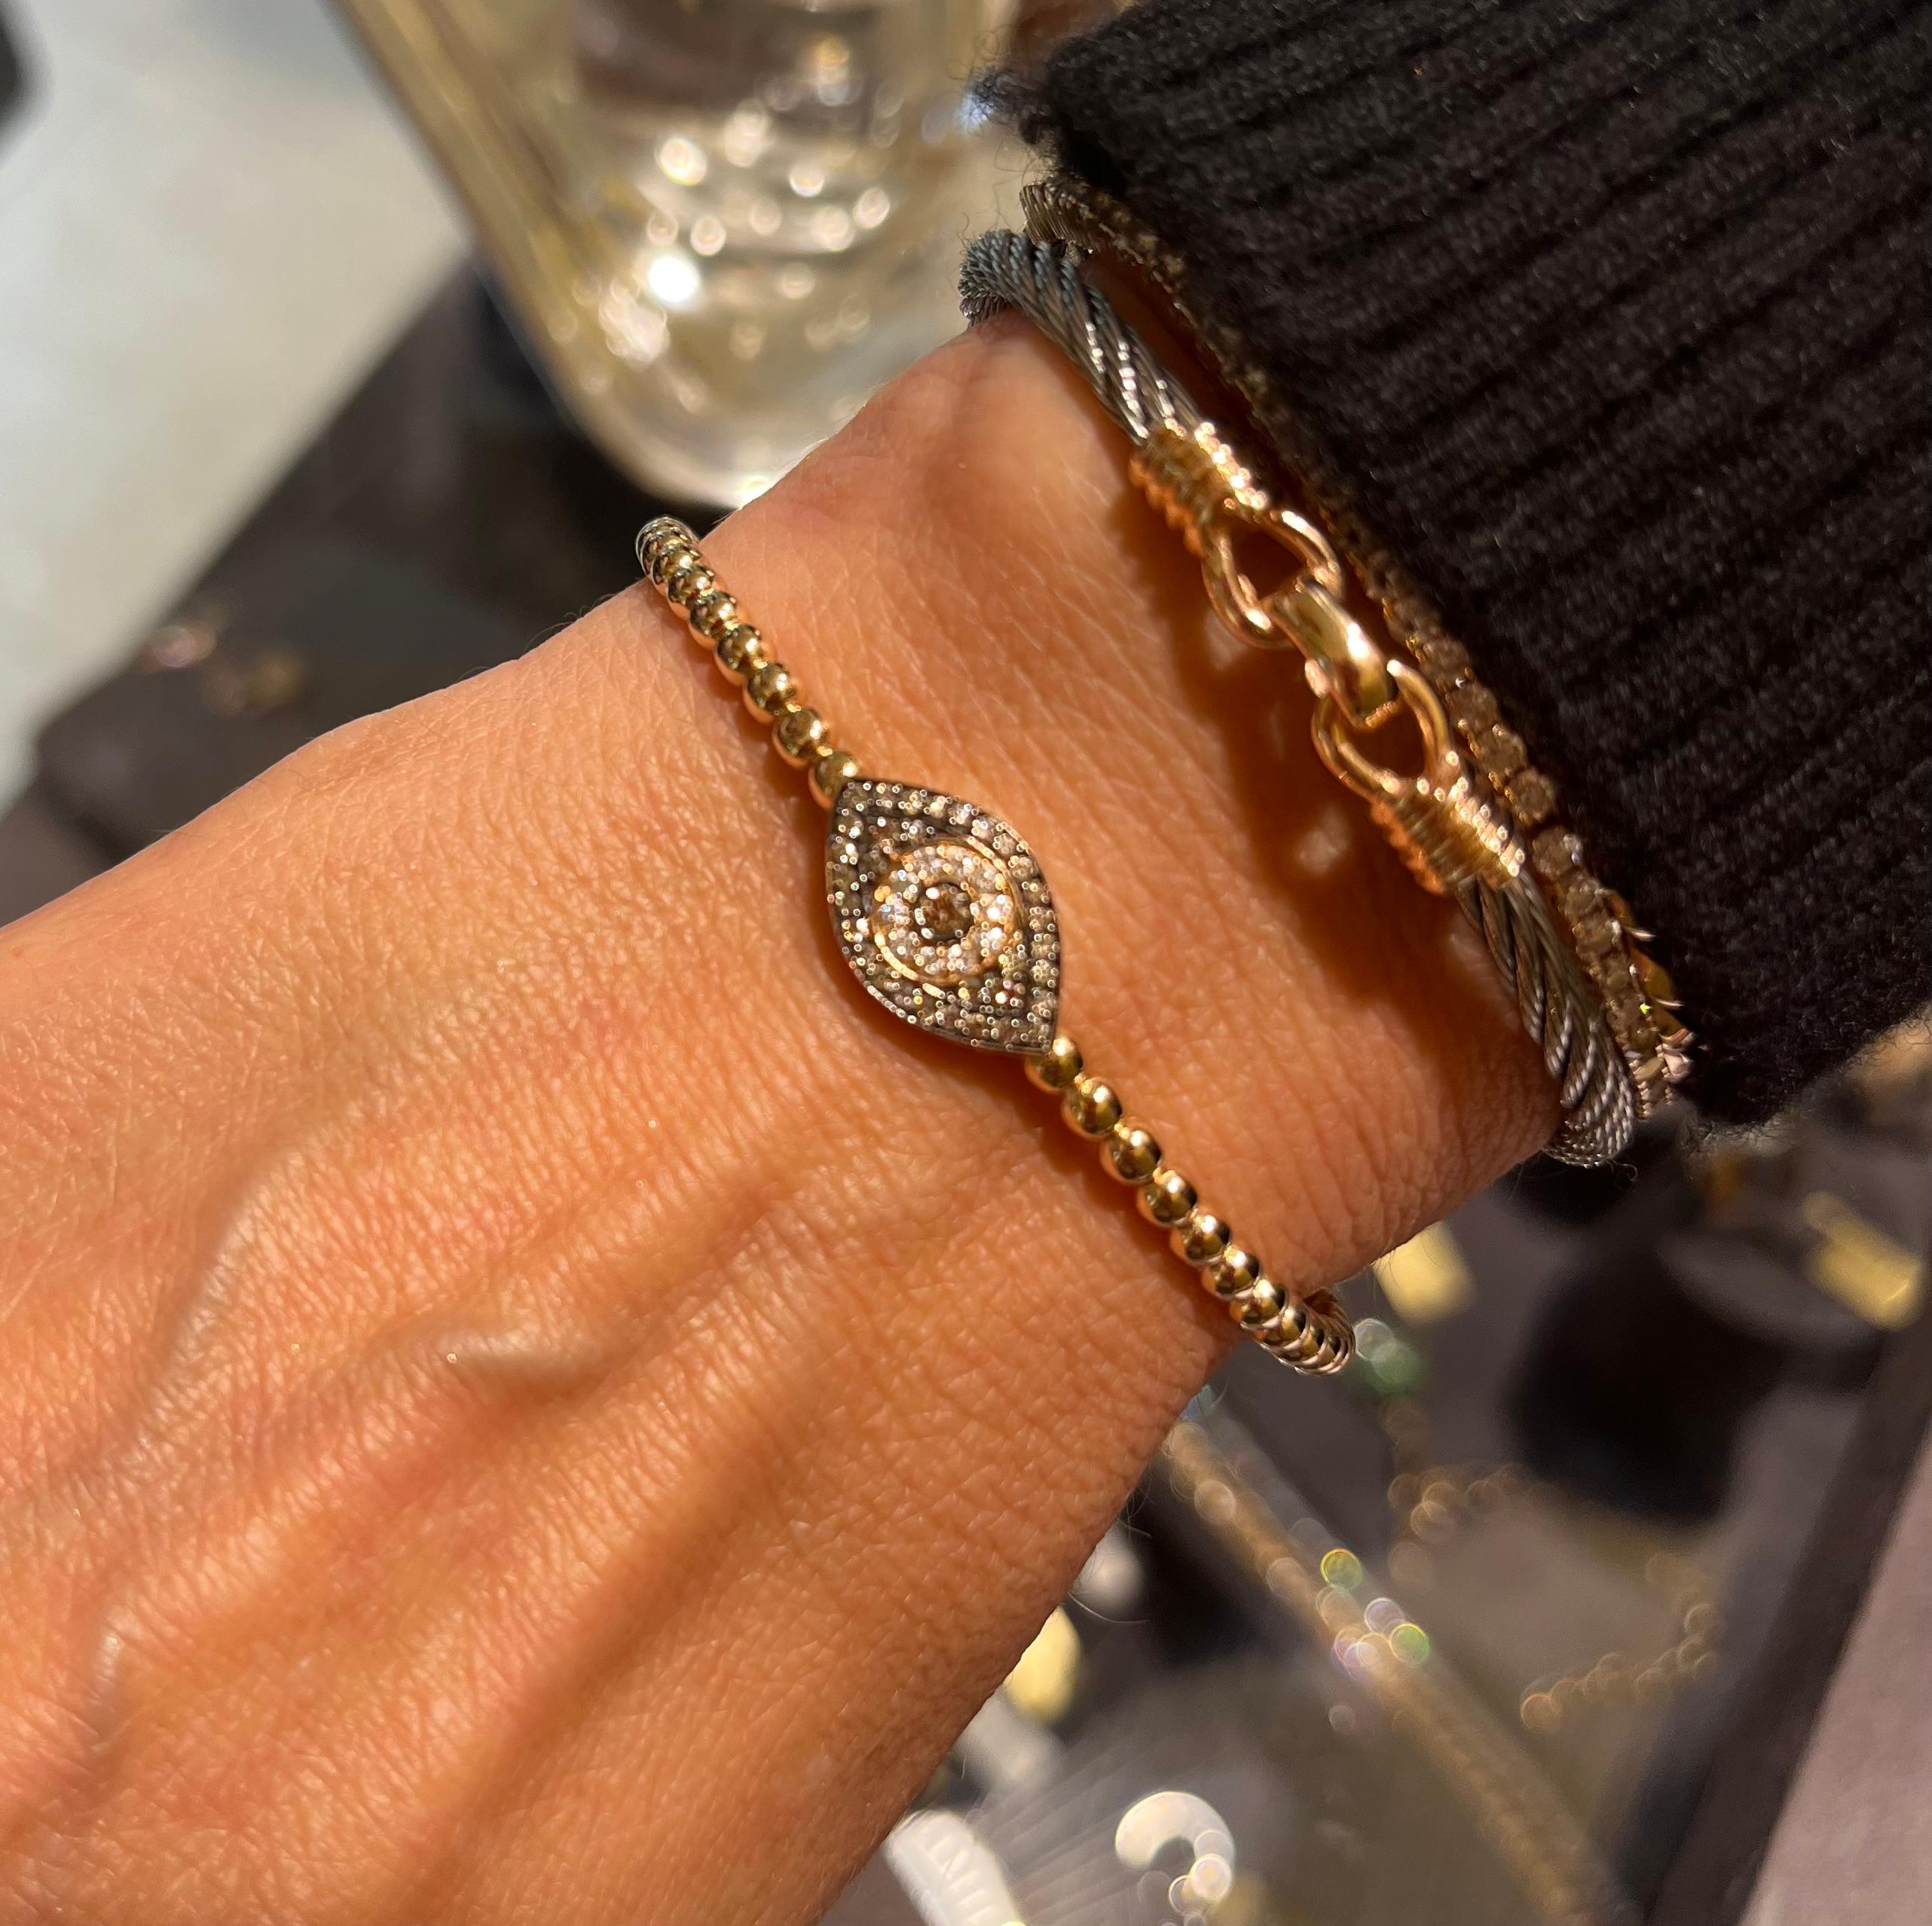 It is an 10,38 gr Gold bangle with diamonds
Evil Eye concept is one of the oldest concept coming from ancient traditions. It is  one of the strongest symbolic images in the world. Meri Lou elegantly redesigned the shape and made a modern, glamorous